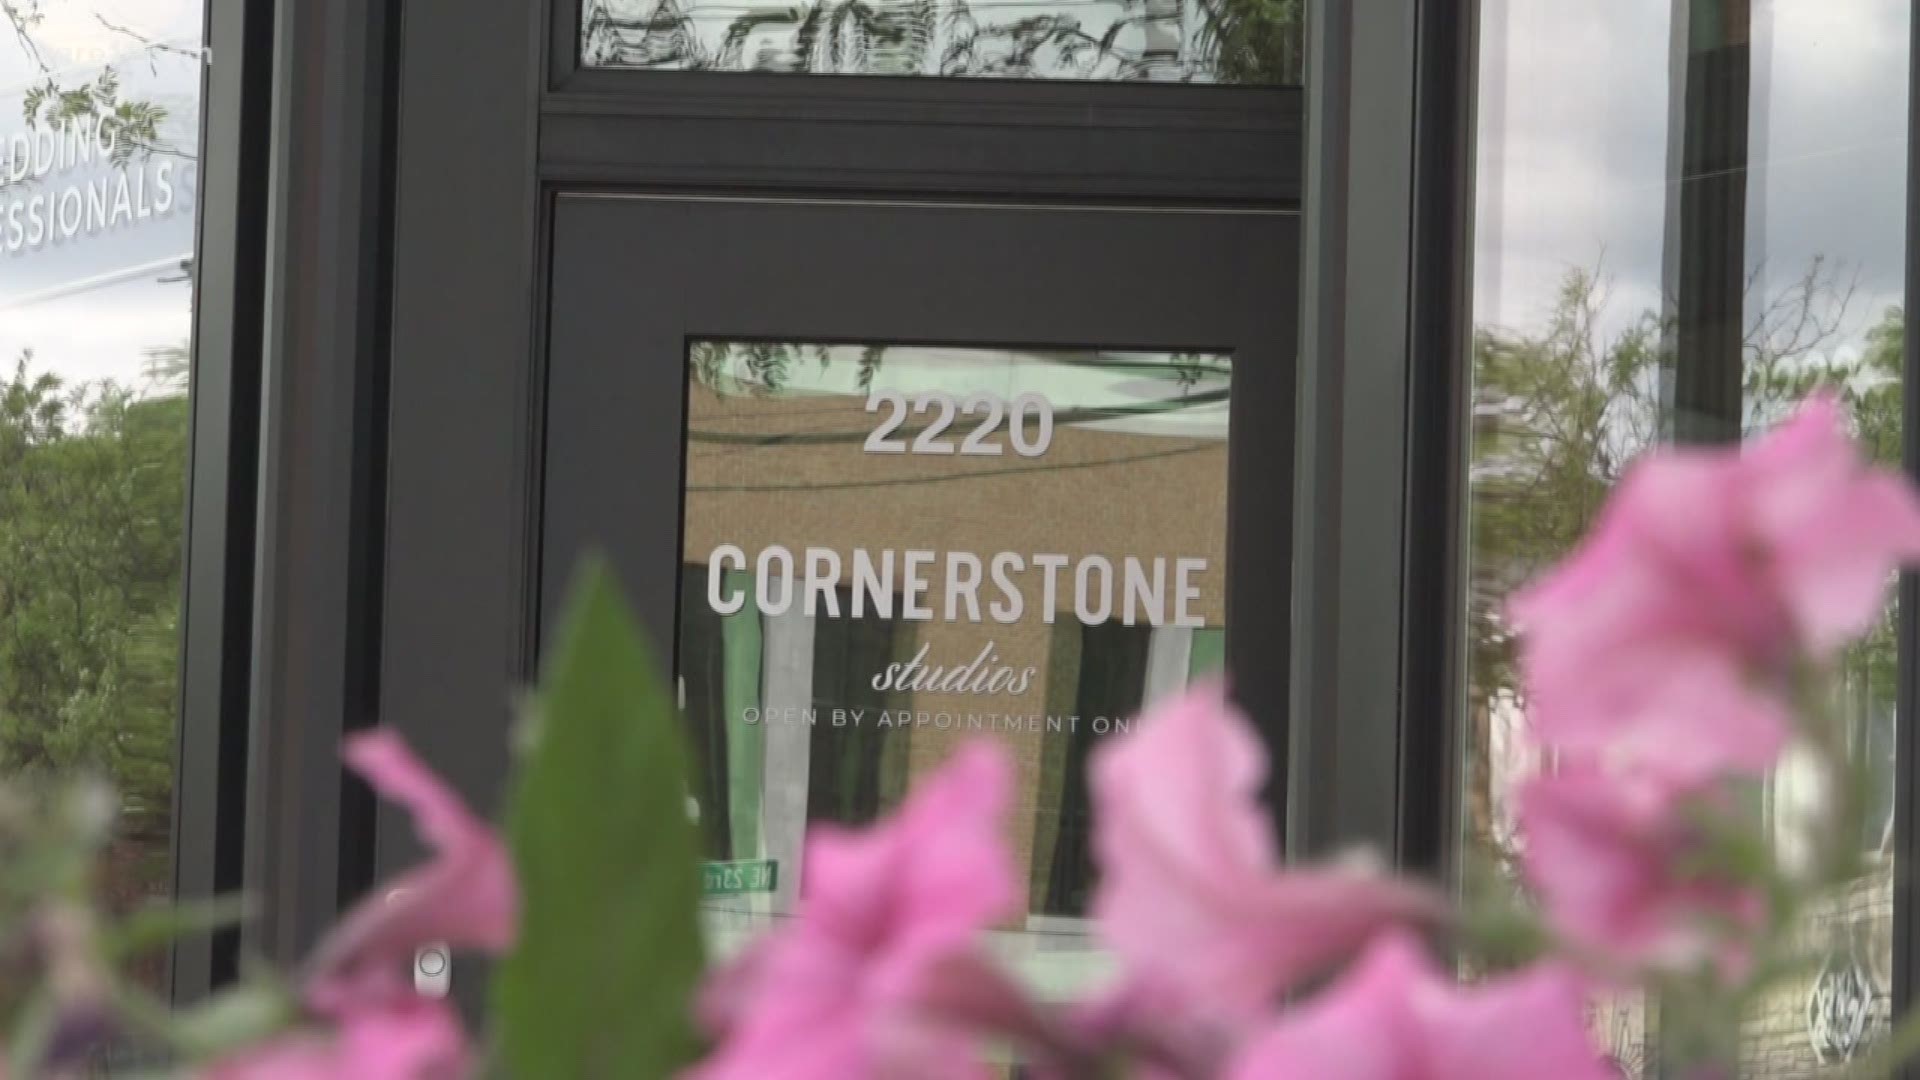 Cornerstone Studios, founded by Jody Winter, is a co-working space that currently houses twenty one creative businesses that work in the wedding and entertainment industry.